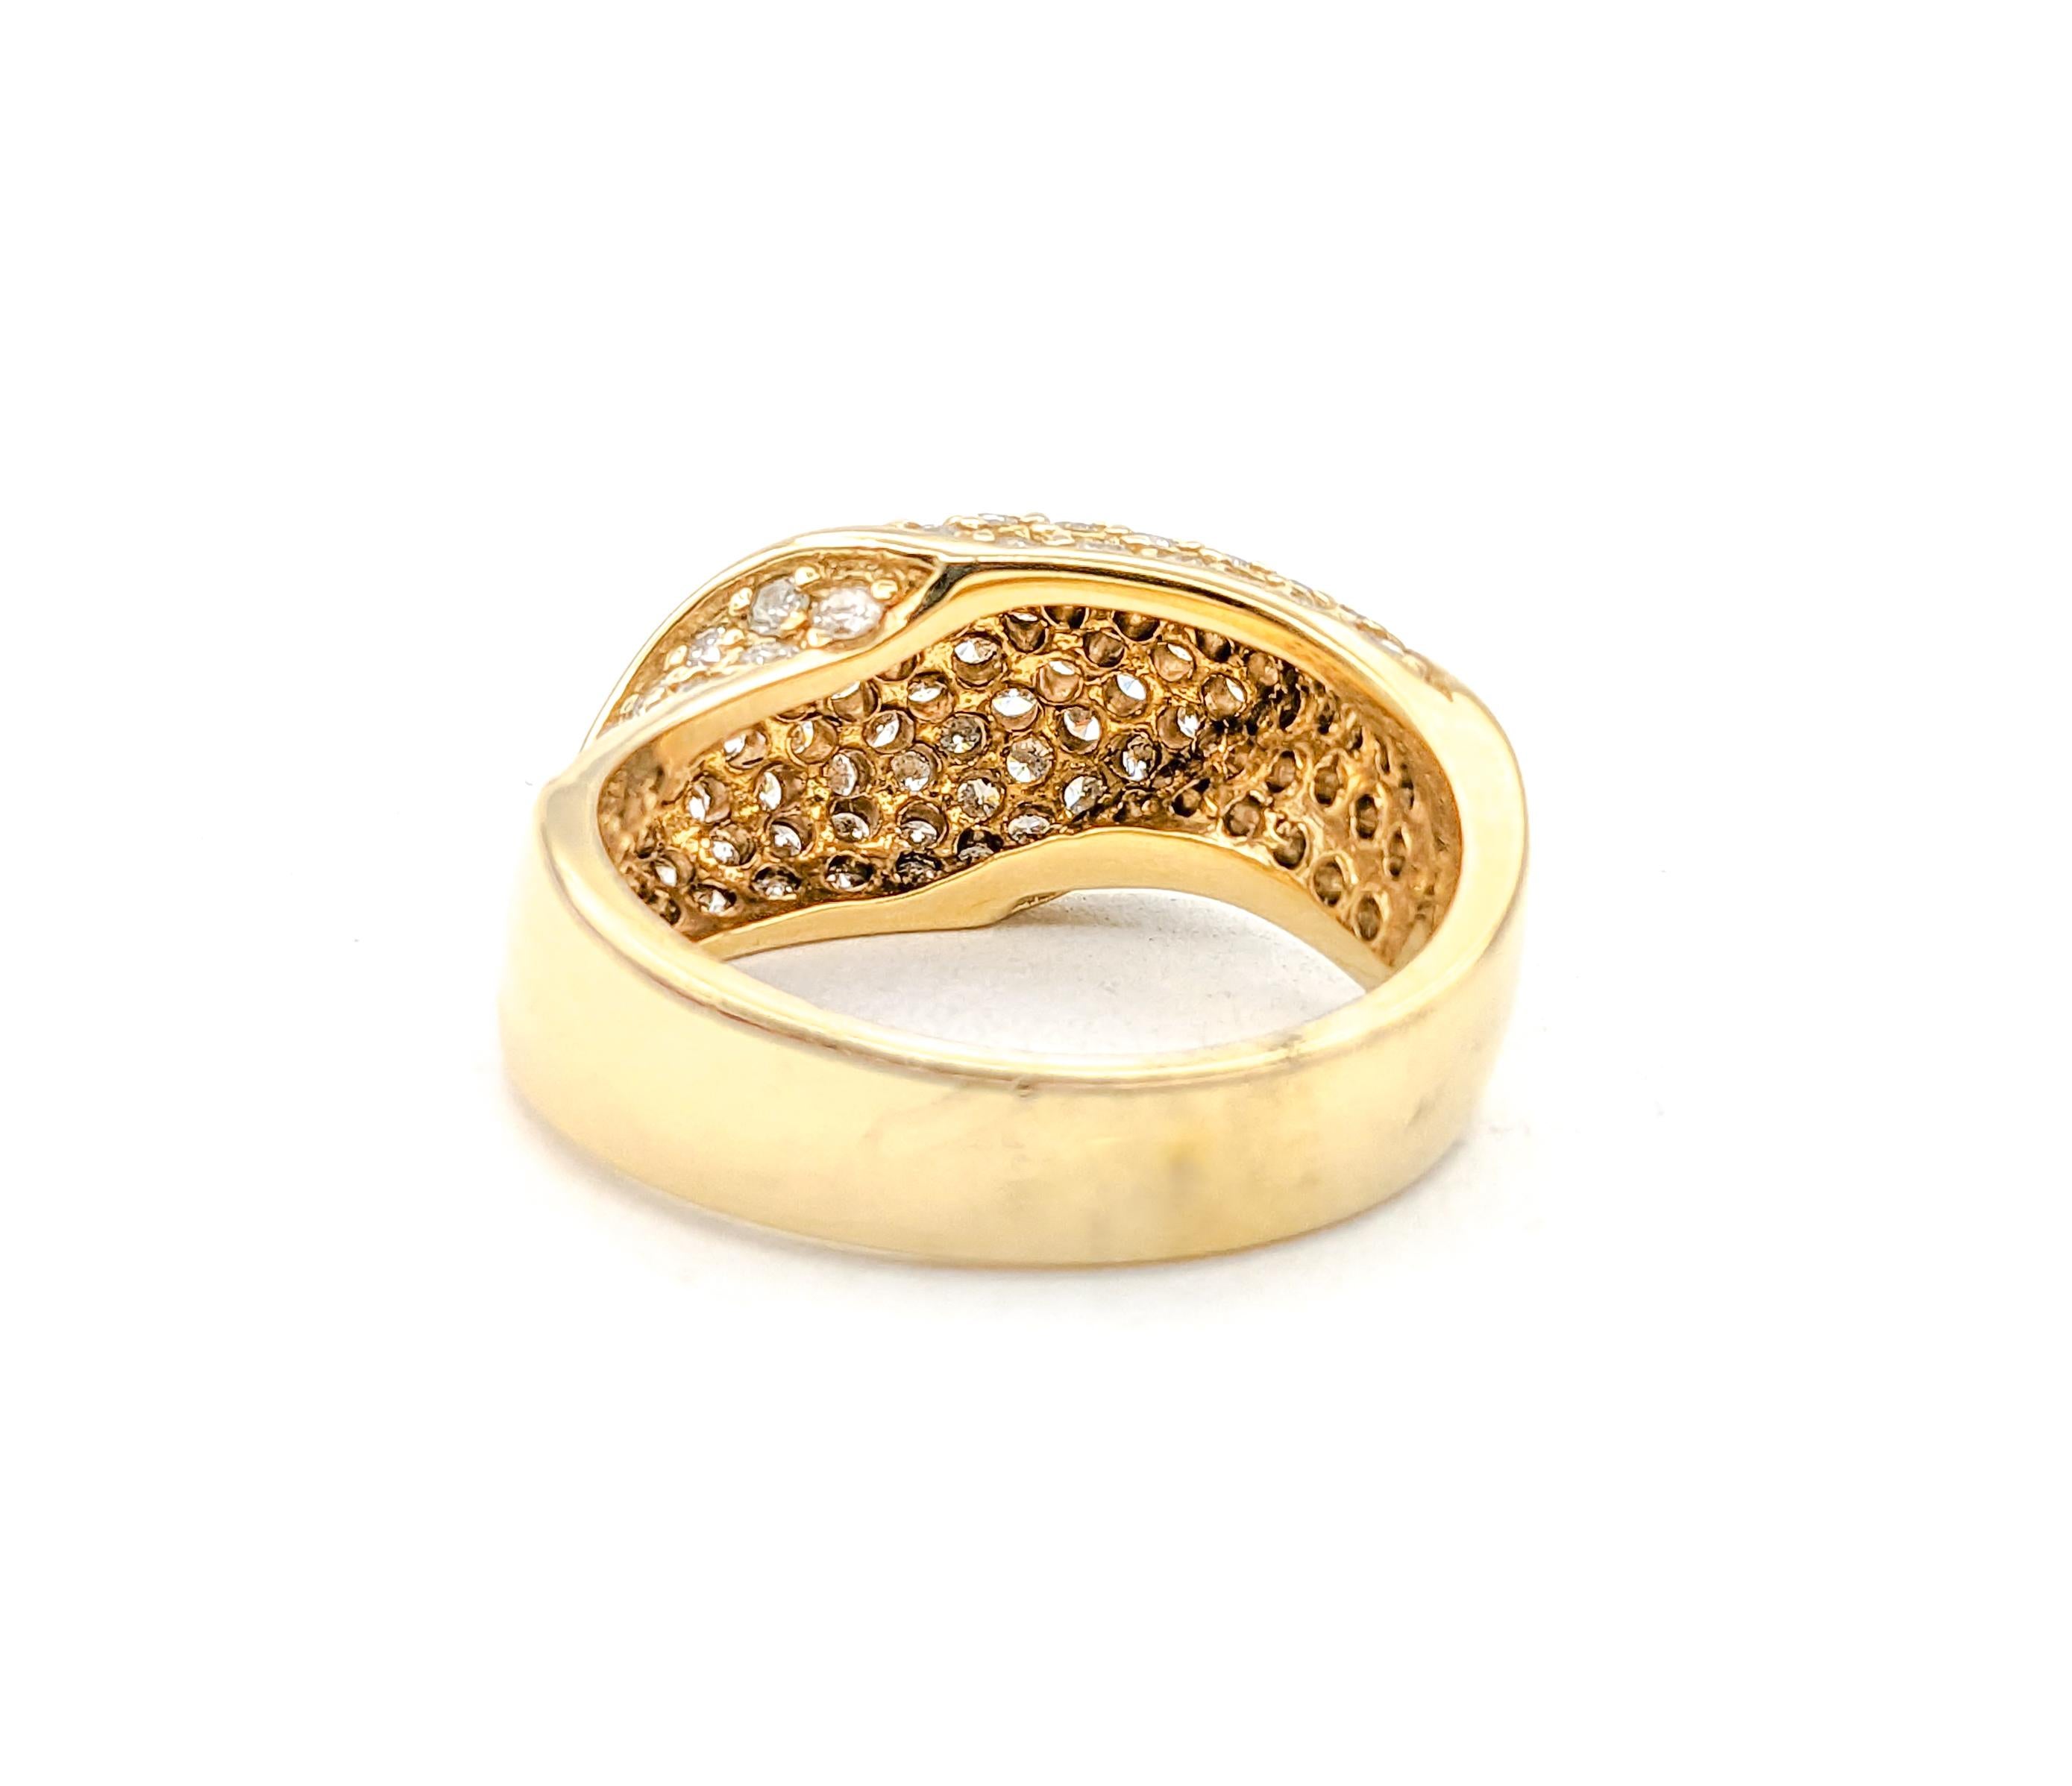 1.63ctw Diamond Ring In Yellow Gold For Sale 2